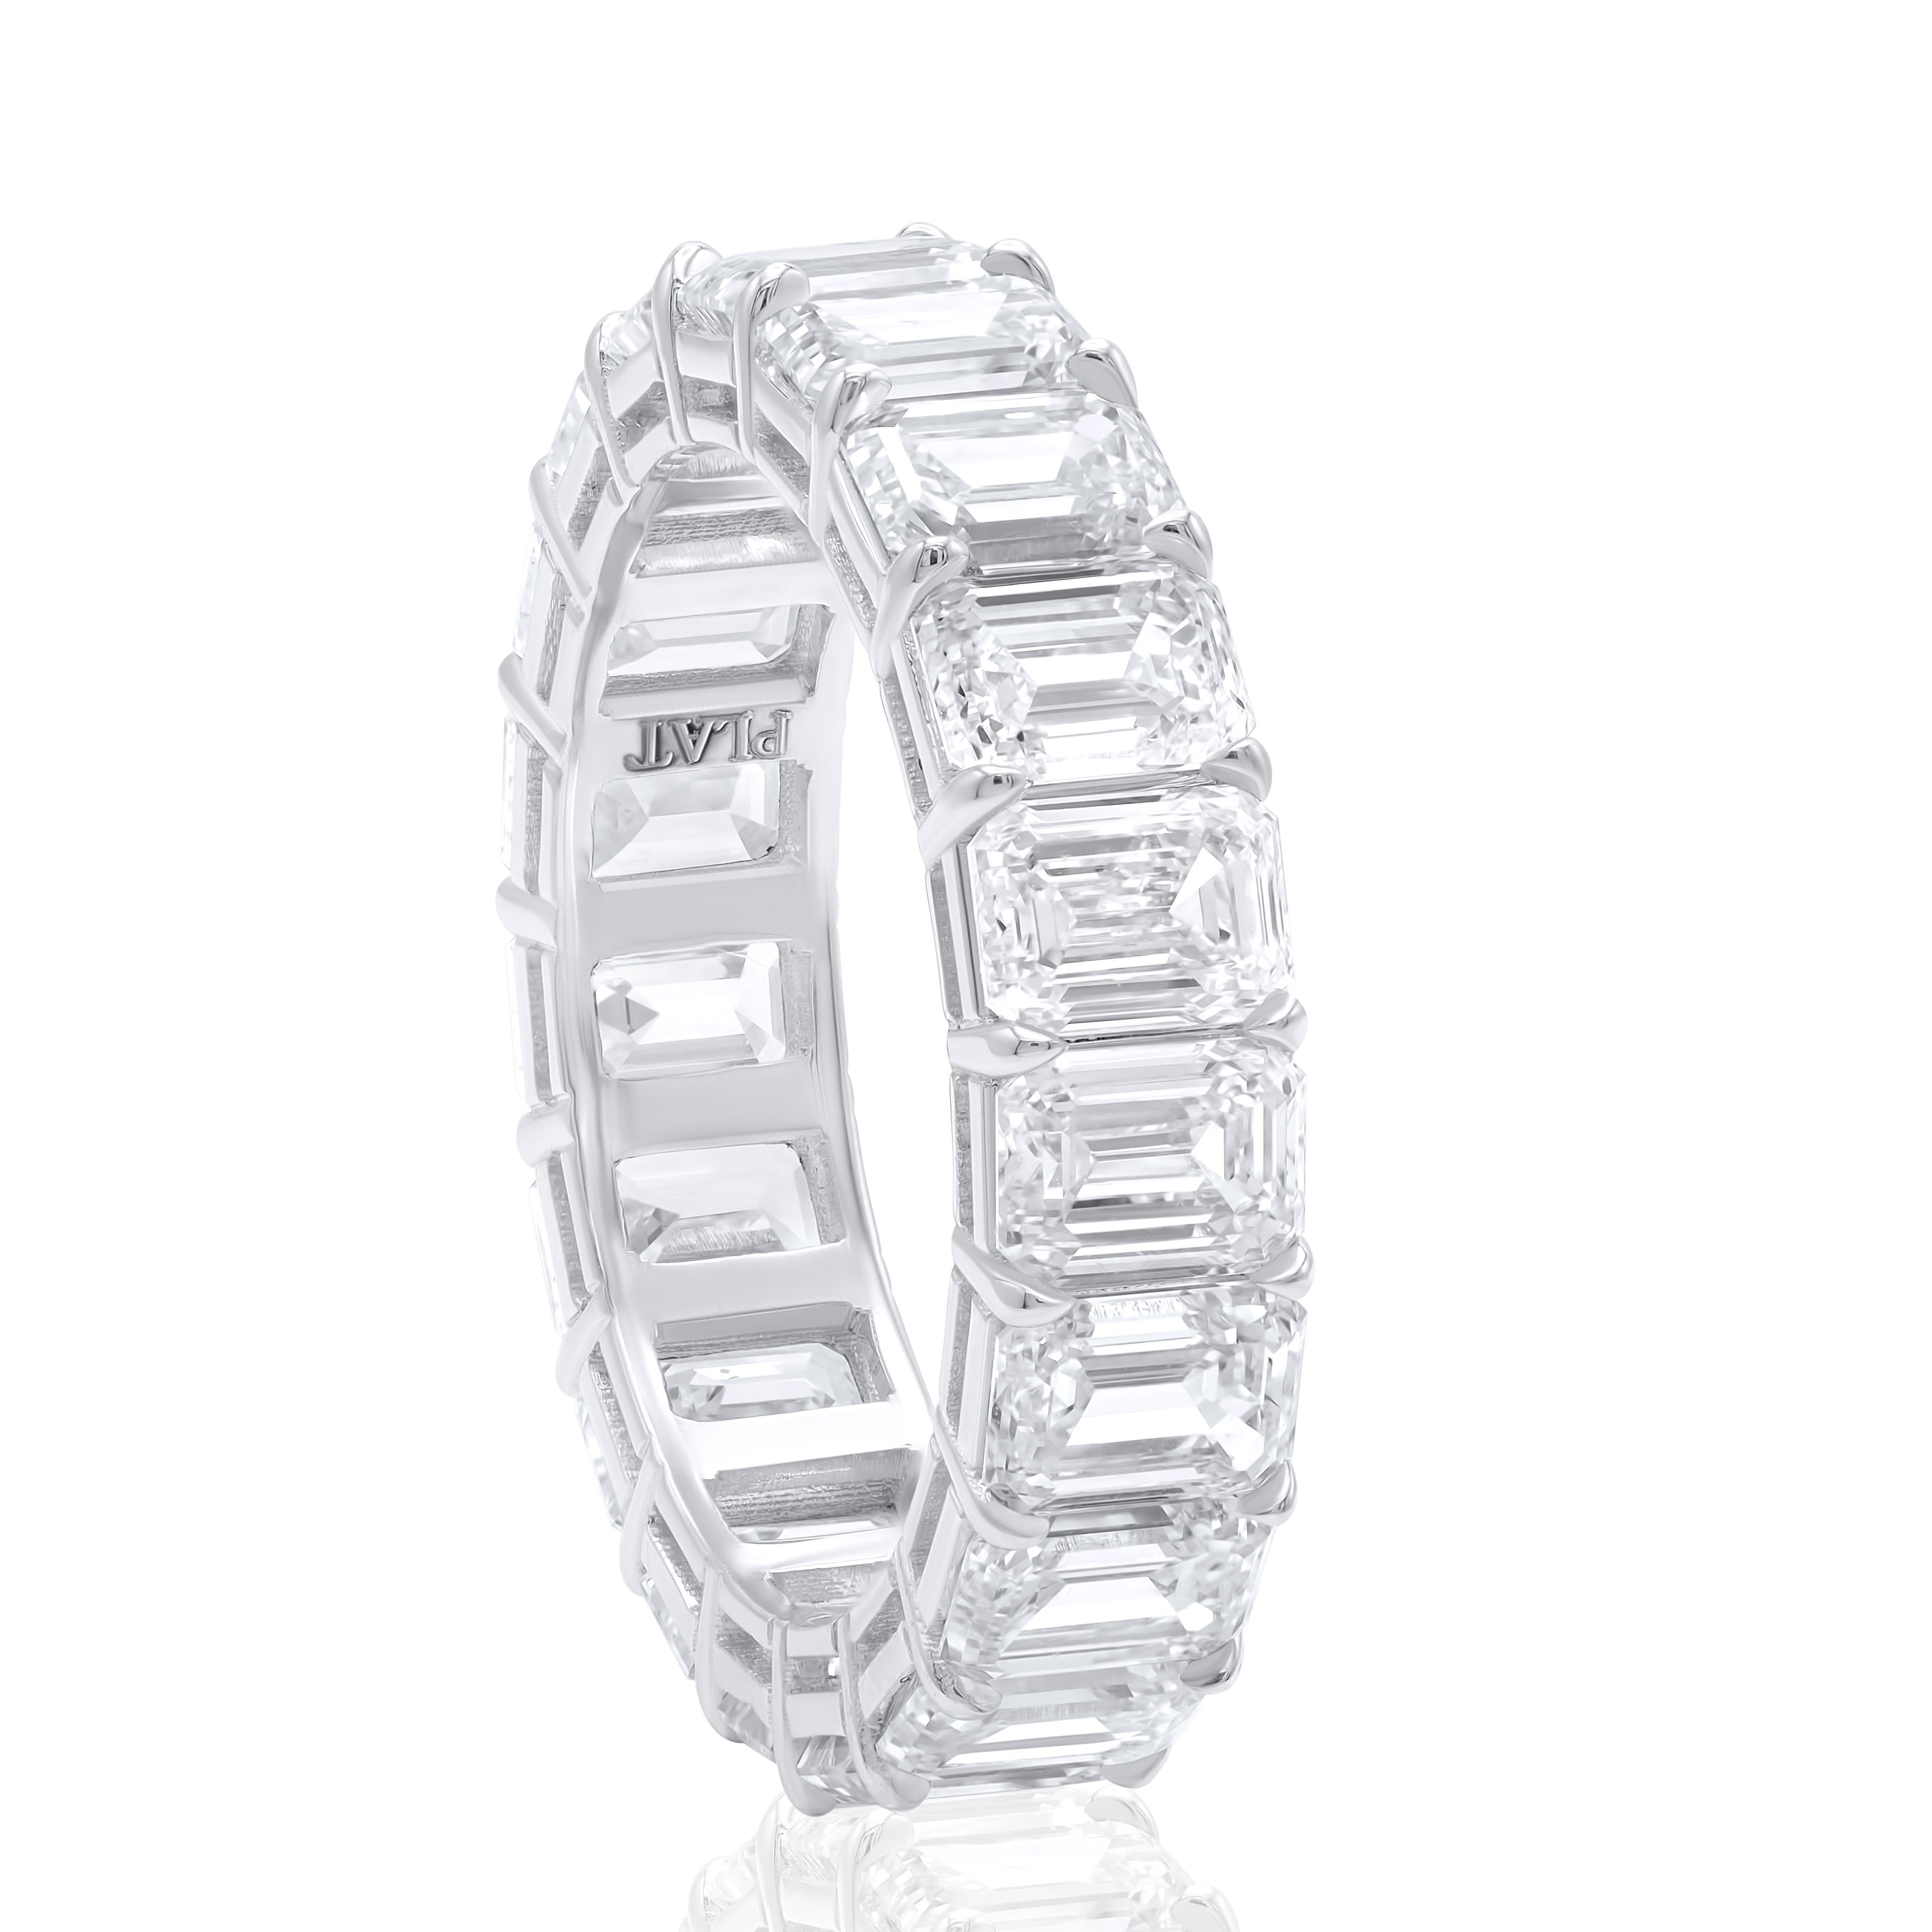 18KT WHITE GOLD WEDDING BAND 5.00CTS EMERALD CUT DIAMONDS, 21STONE
Diana M. is a leading supplier of top-quality fine jewelry for over 35 years.
Diana M is one-stop shop for all your jewelry shopping, carrying line of diamond rings, earrings,